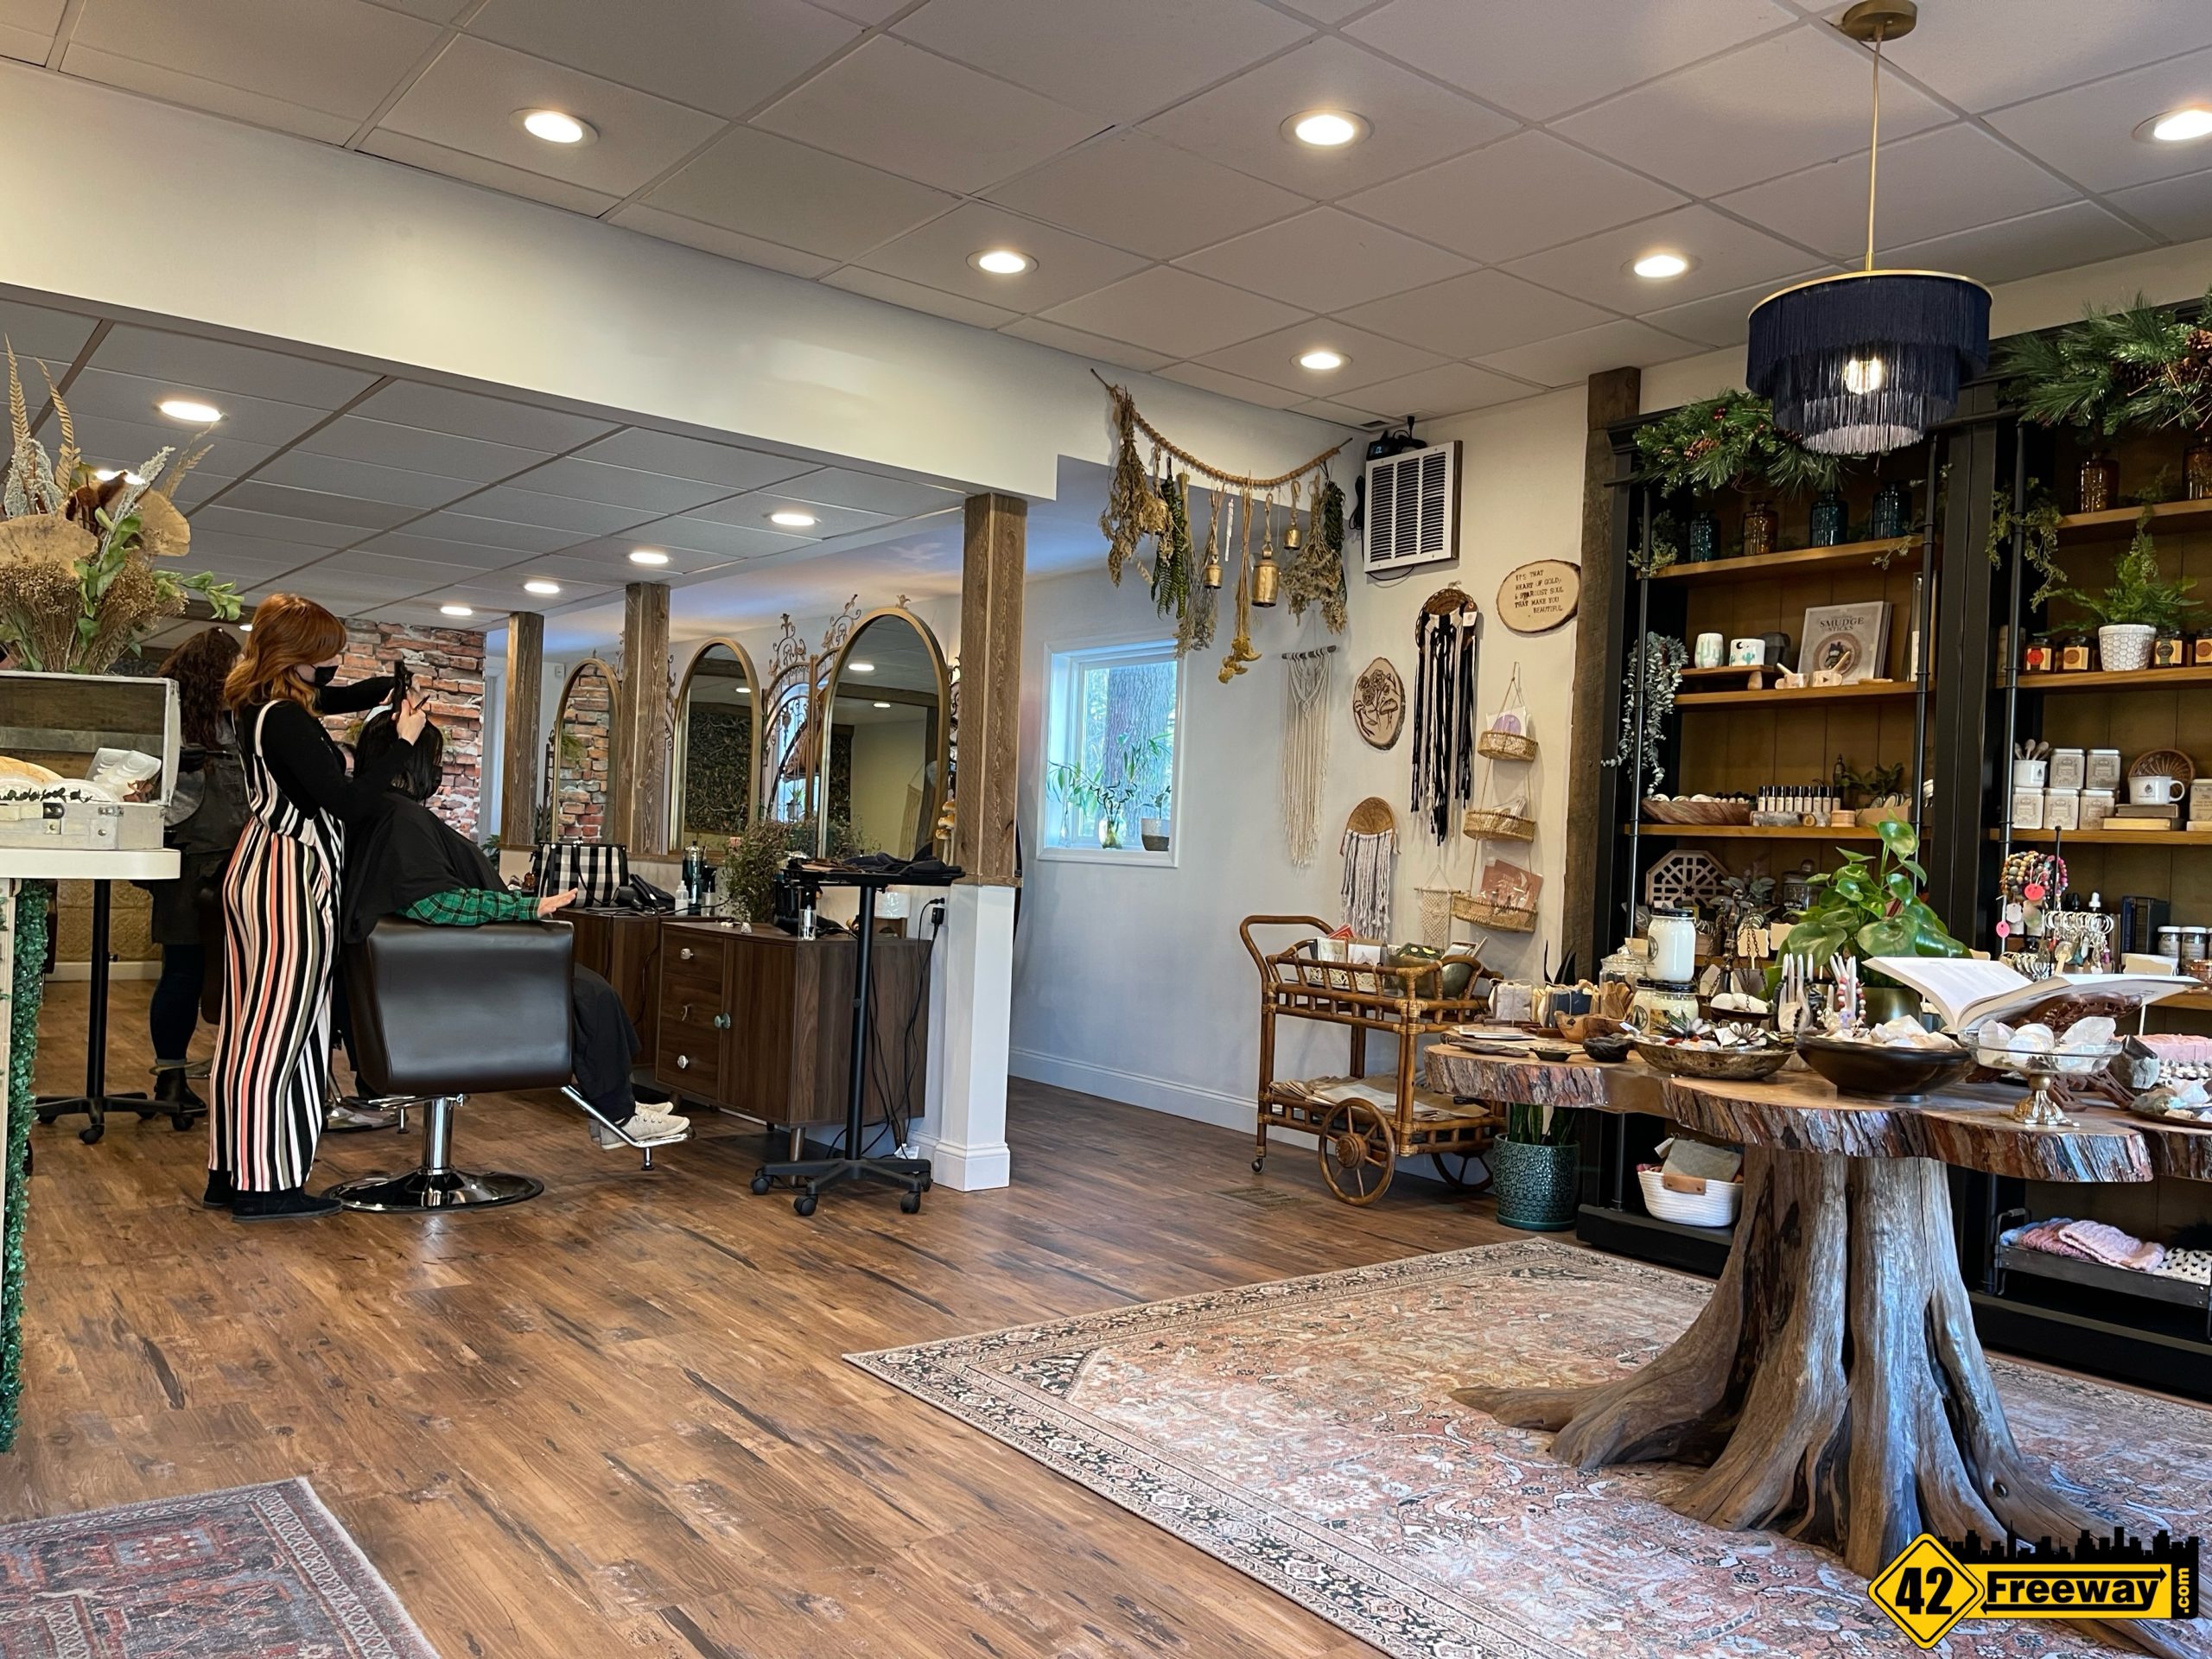 Mystic Ginger Organic Hair Studio and Herbal Apothecary, Blackwood New  Location Tour! - 42 Freeway